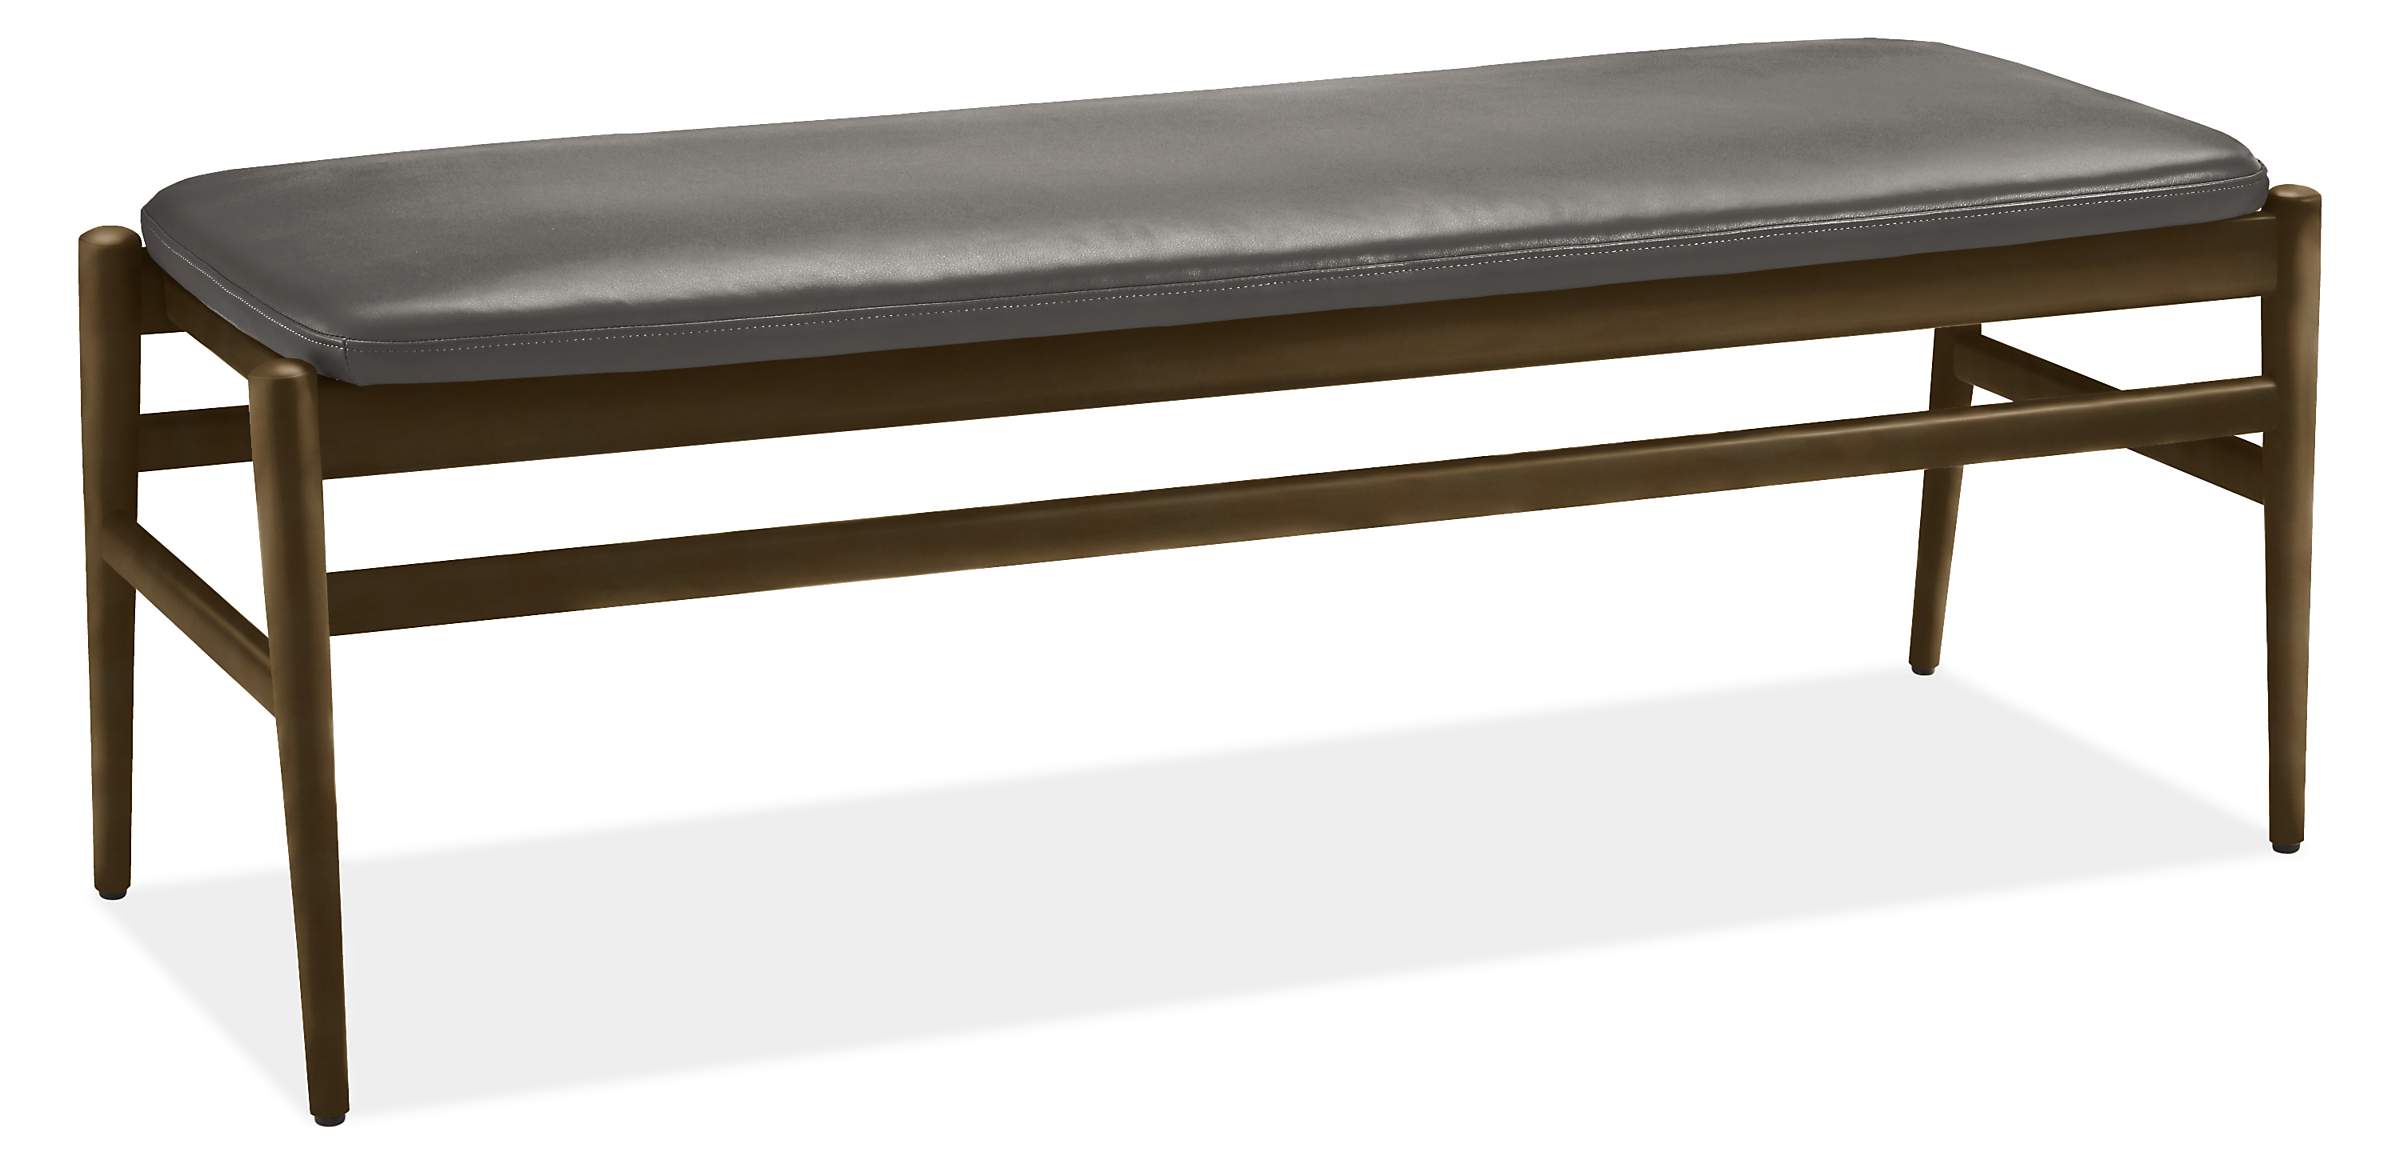 Evan 54w 19d 18h Bench in Charcoal with Pistel Grey Leather